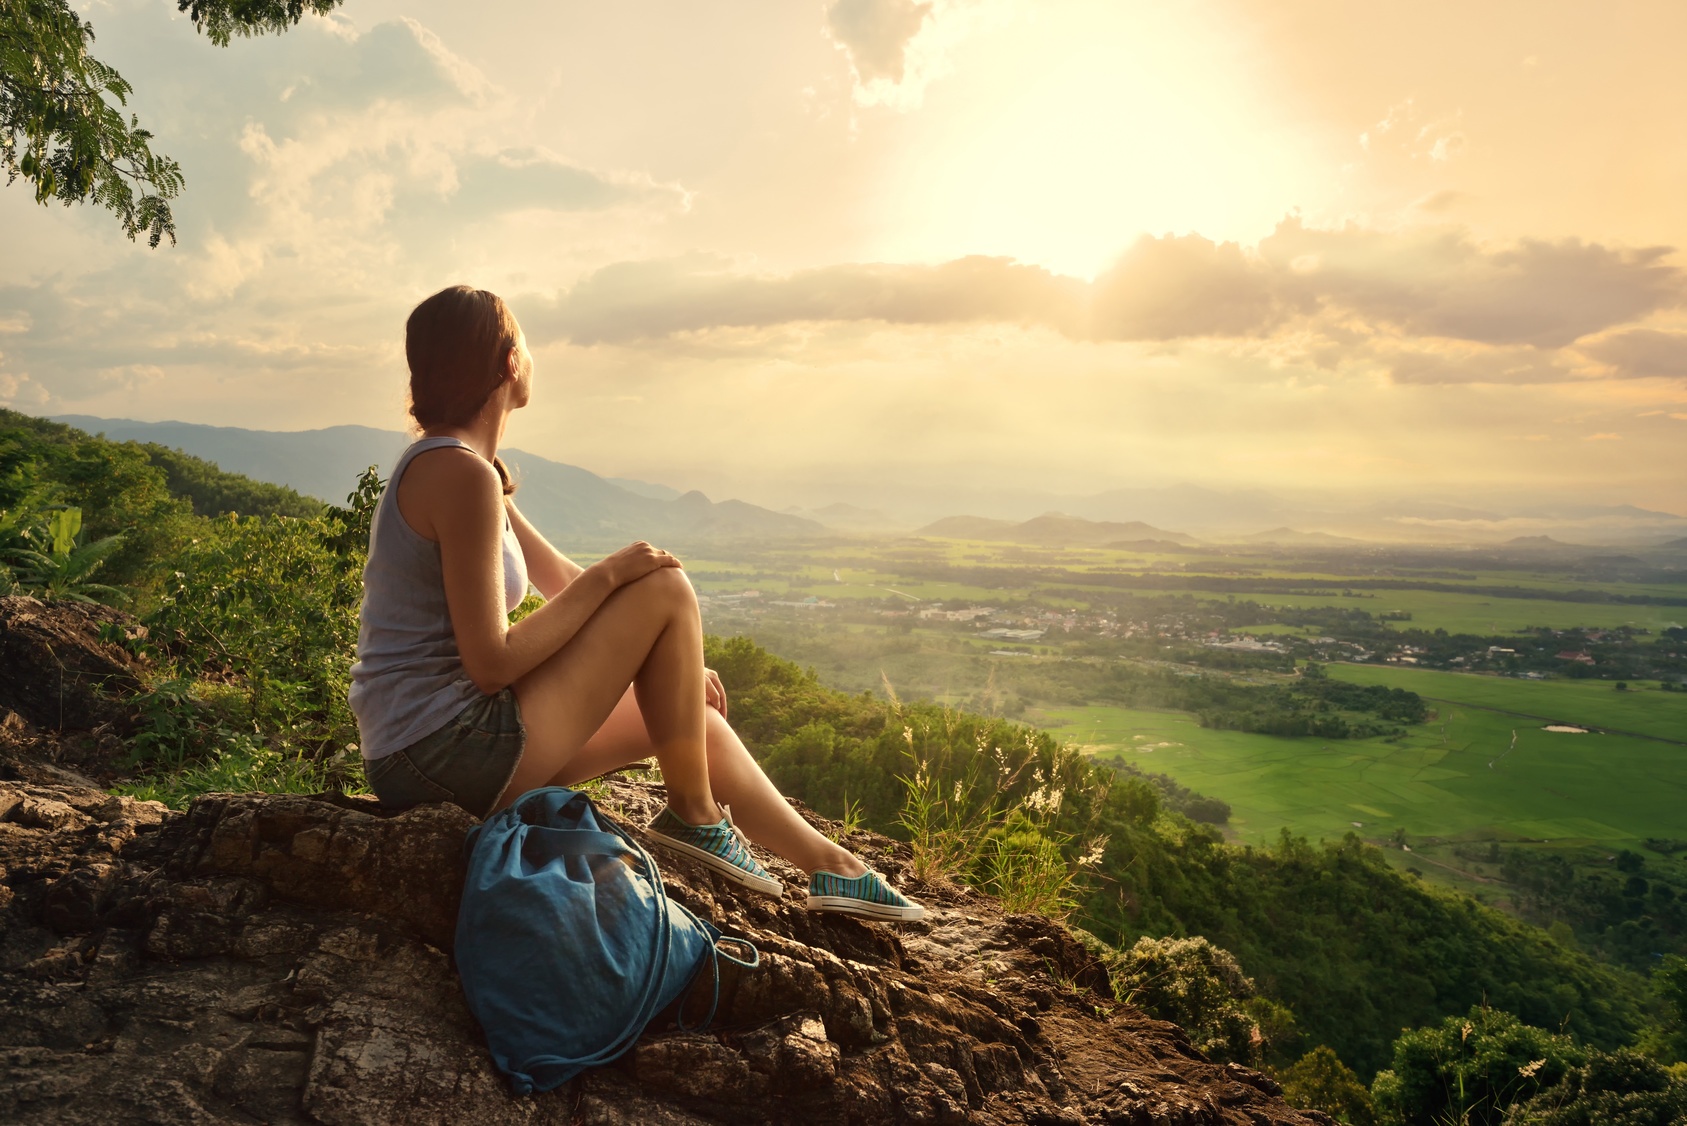 A girl sits on the edge of the cliff and looking at the sun valley and mountains